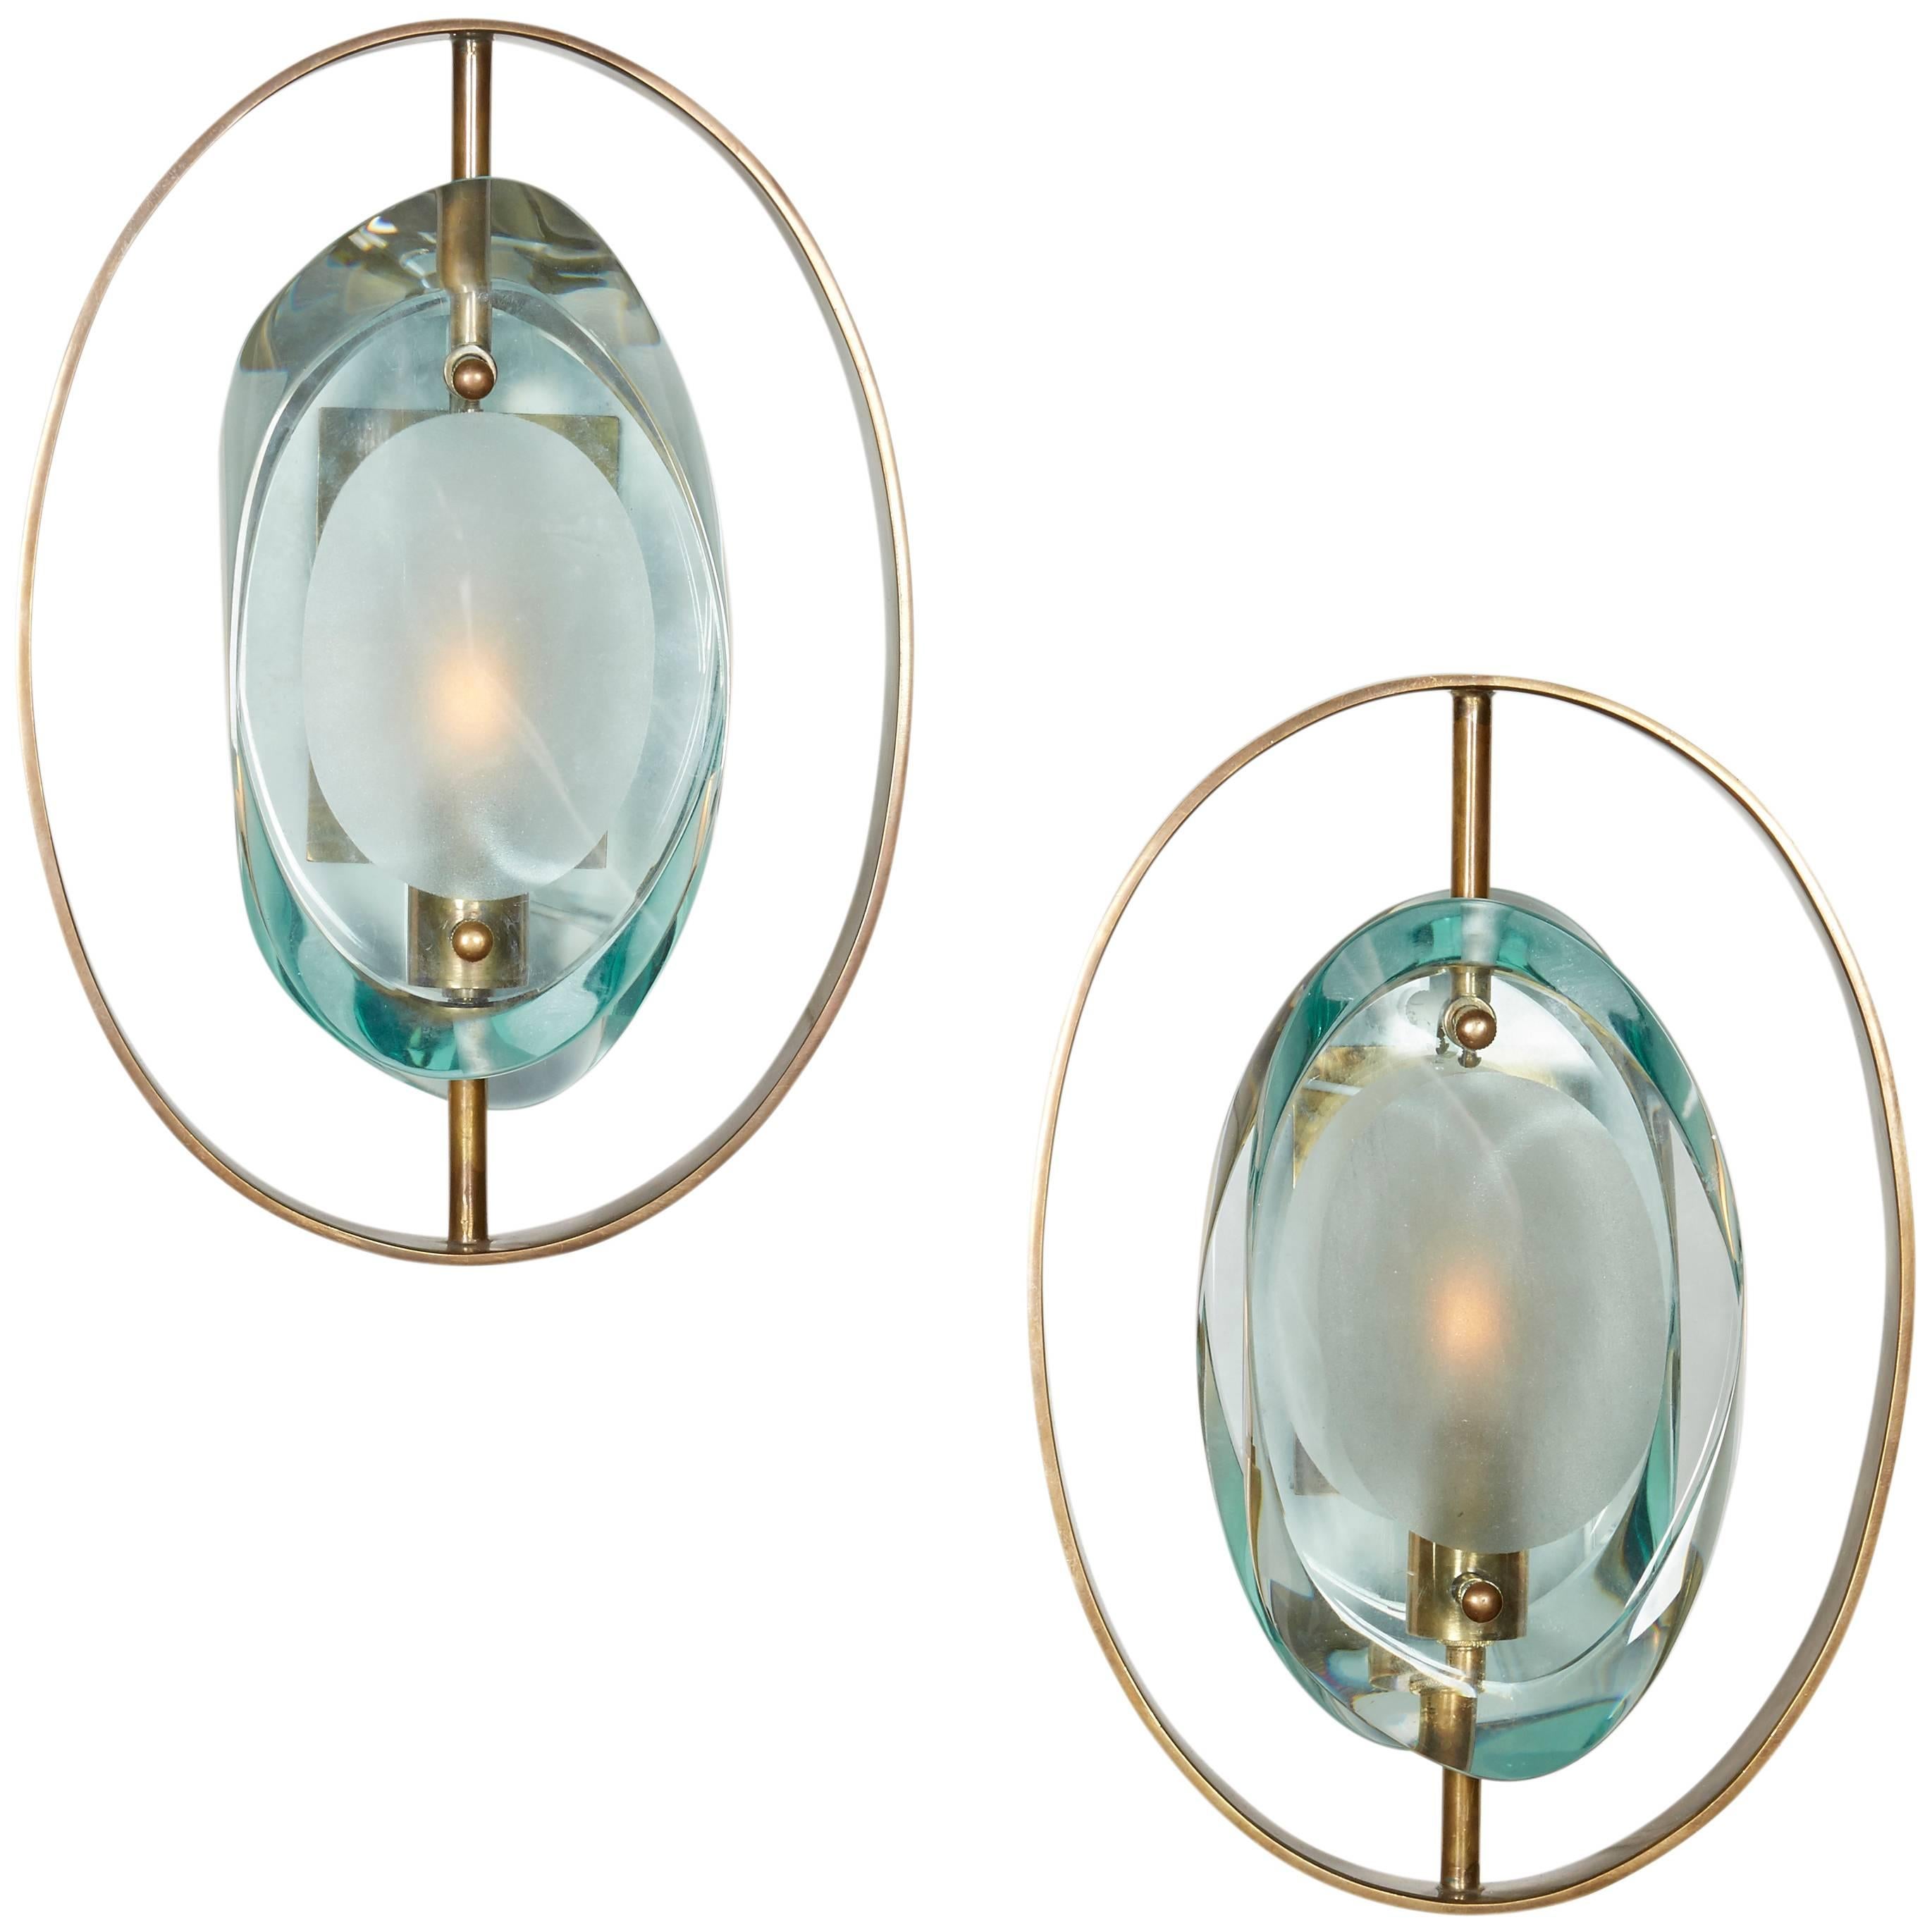 Handcrafted Italian Glass Sconces In the Style of Max Ingrand